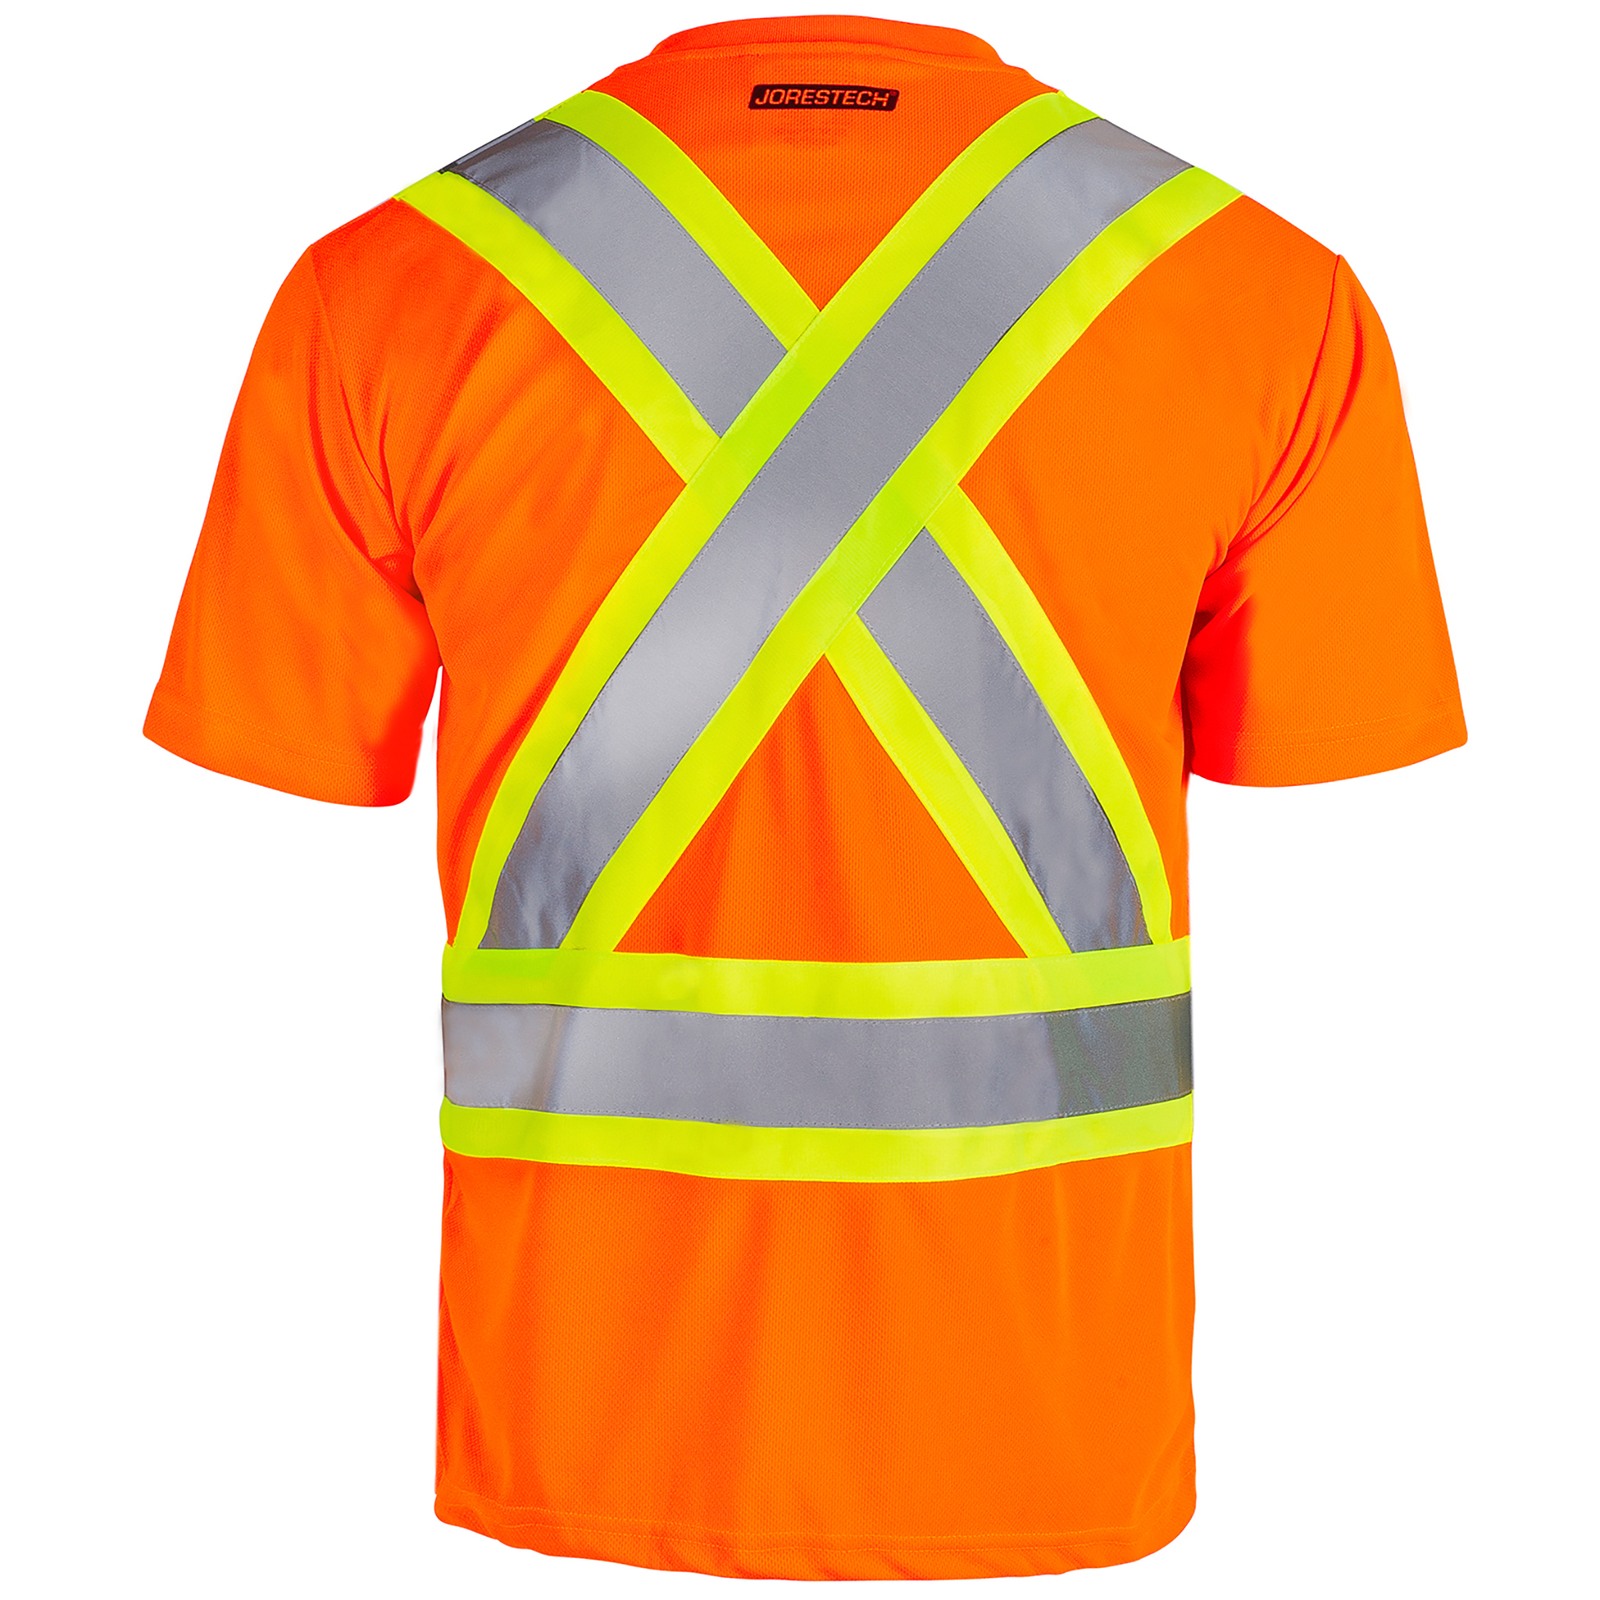 Back view of a Hi-vis reflective two tone safety orange yellow pocket shirt 